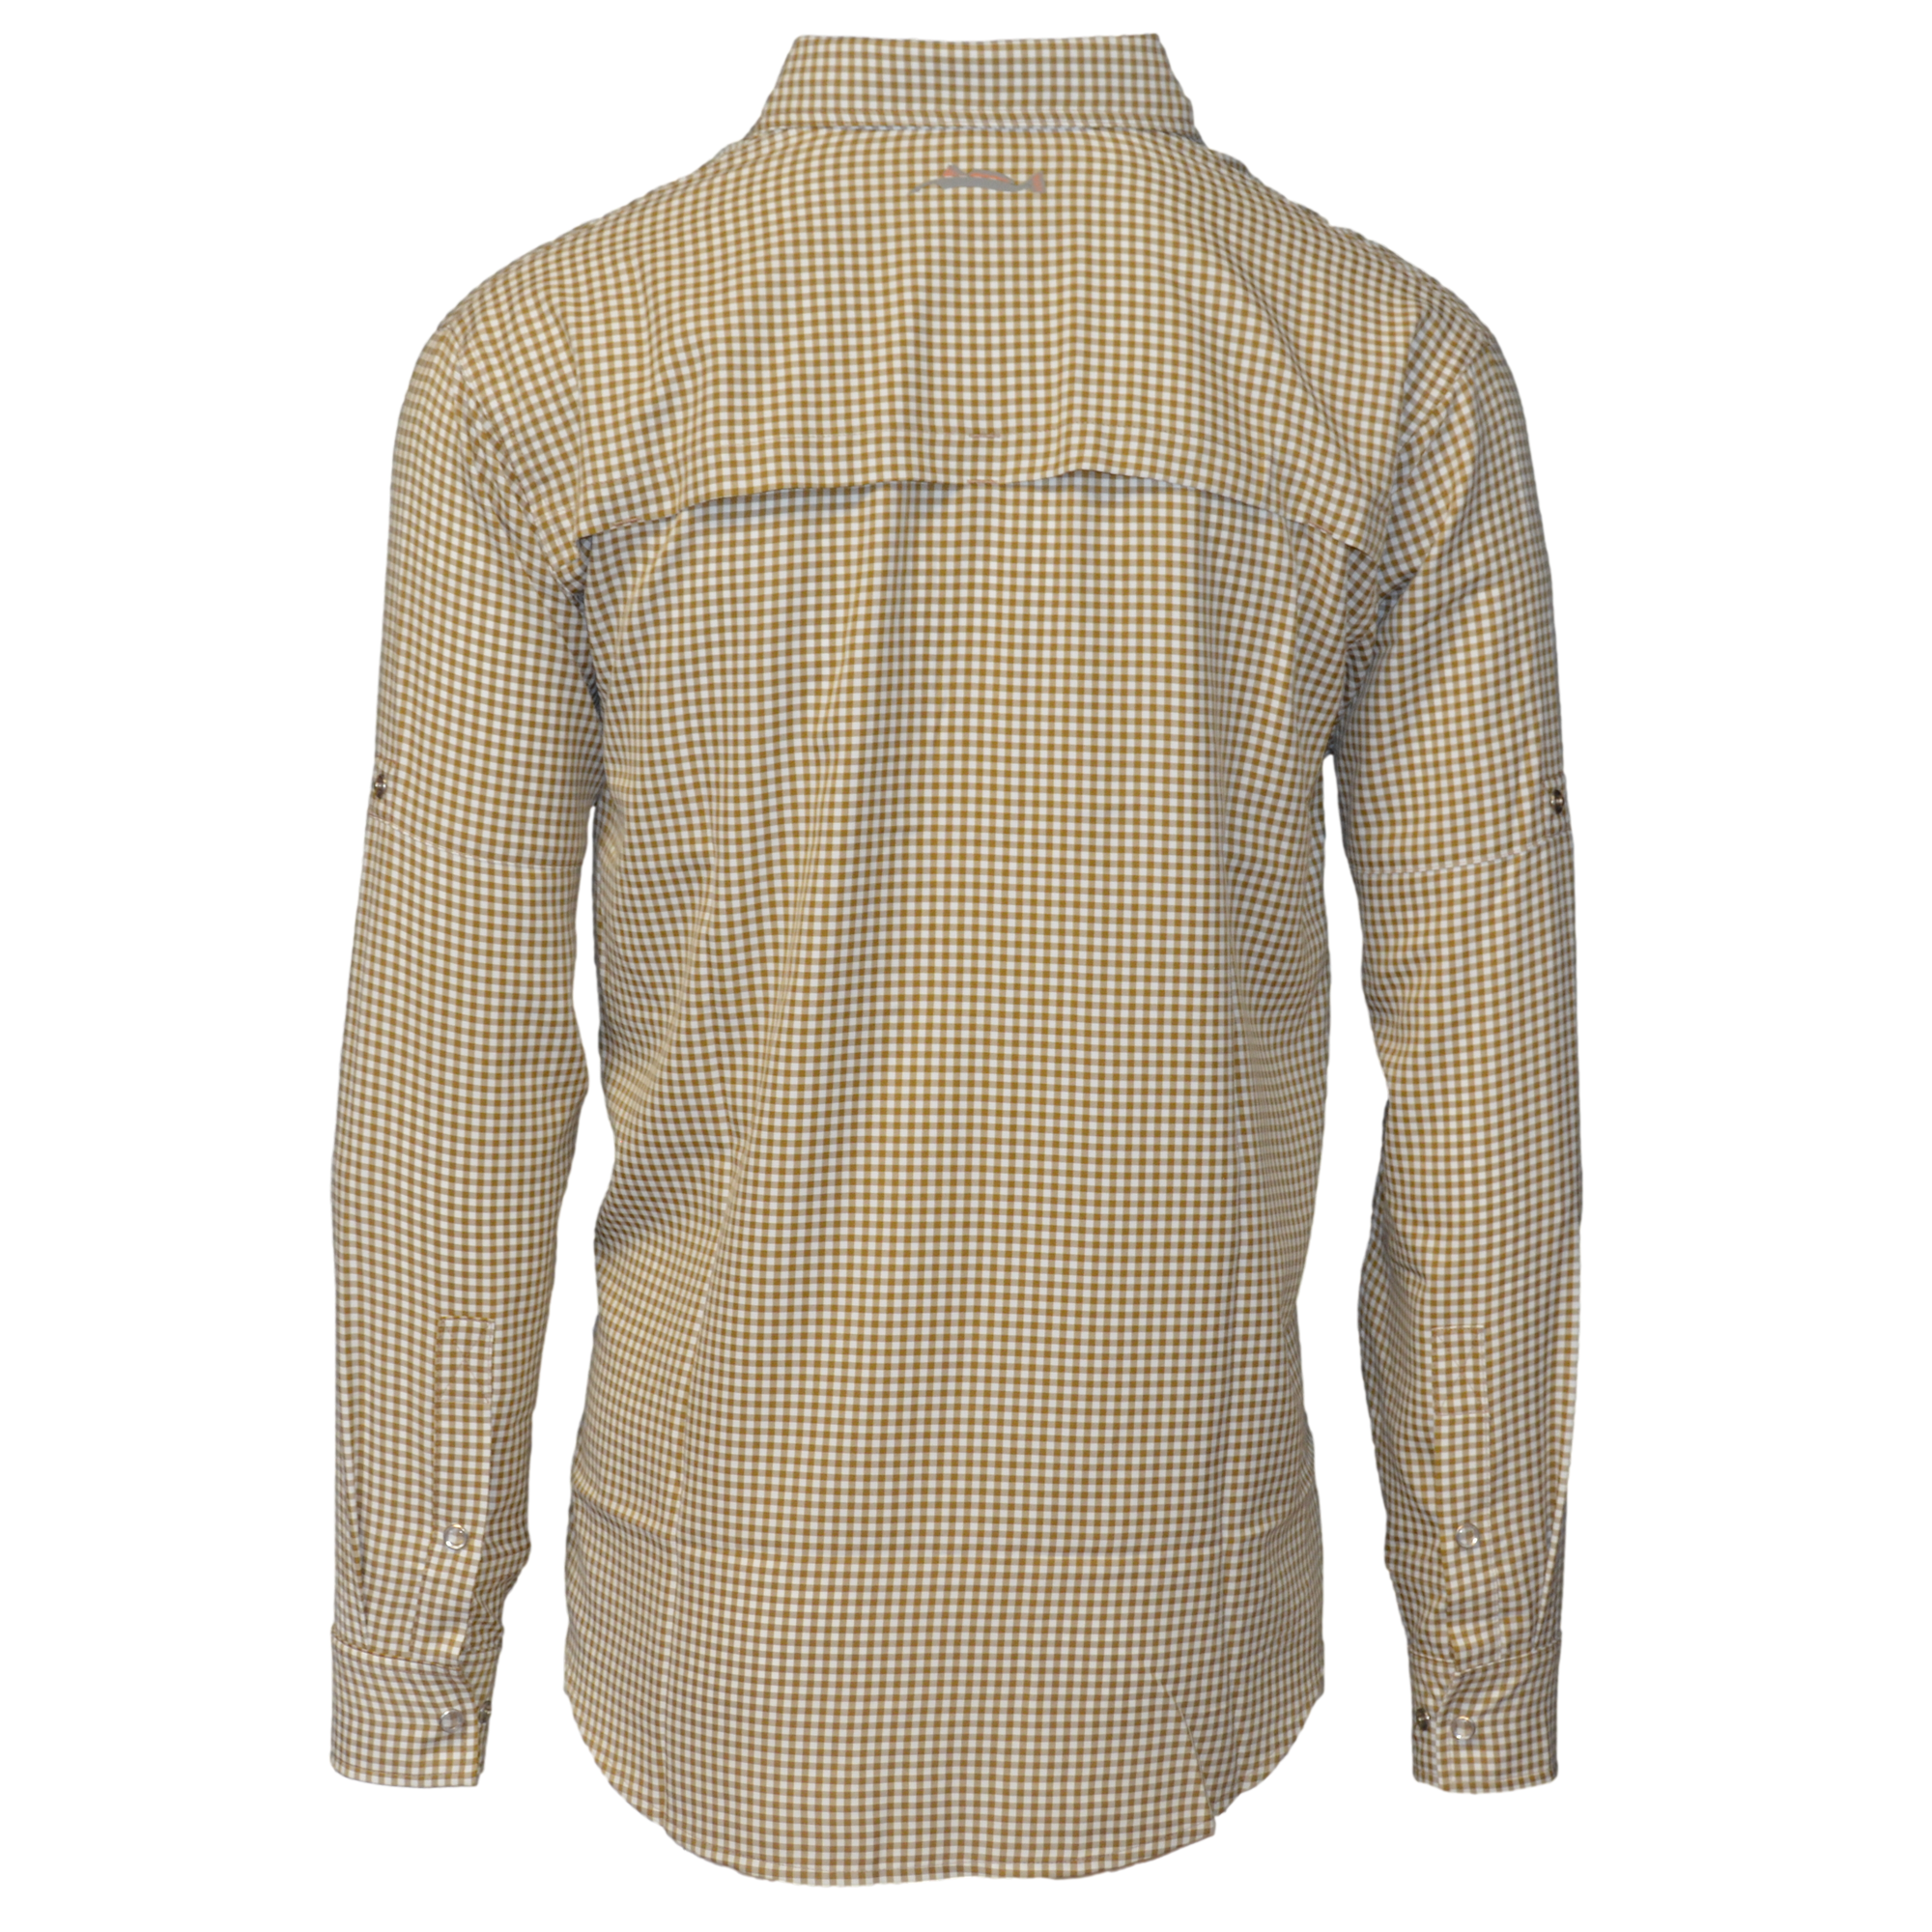 Anomaly Shirt- Brown Gingham